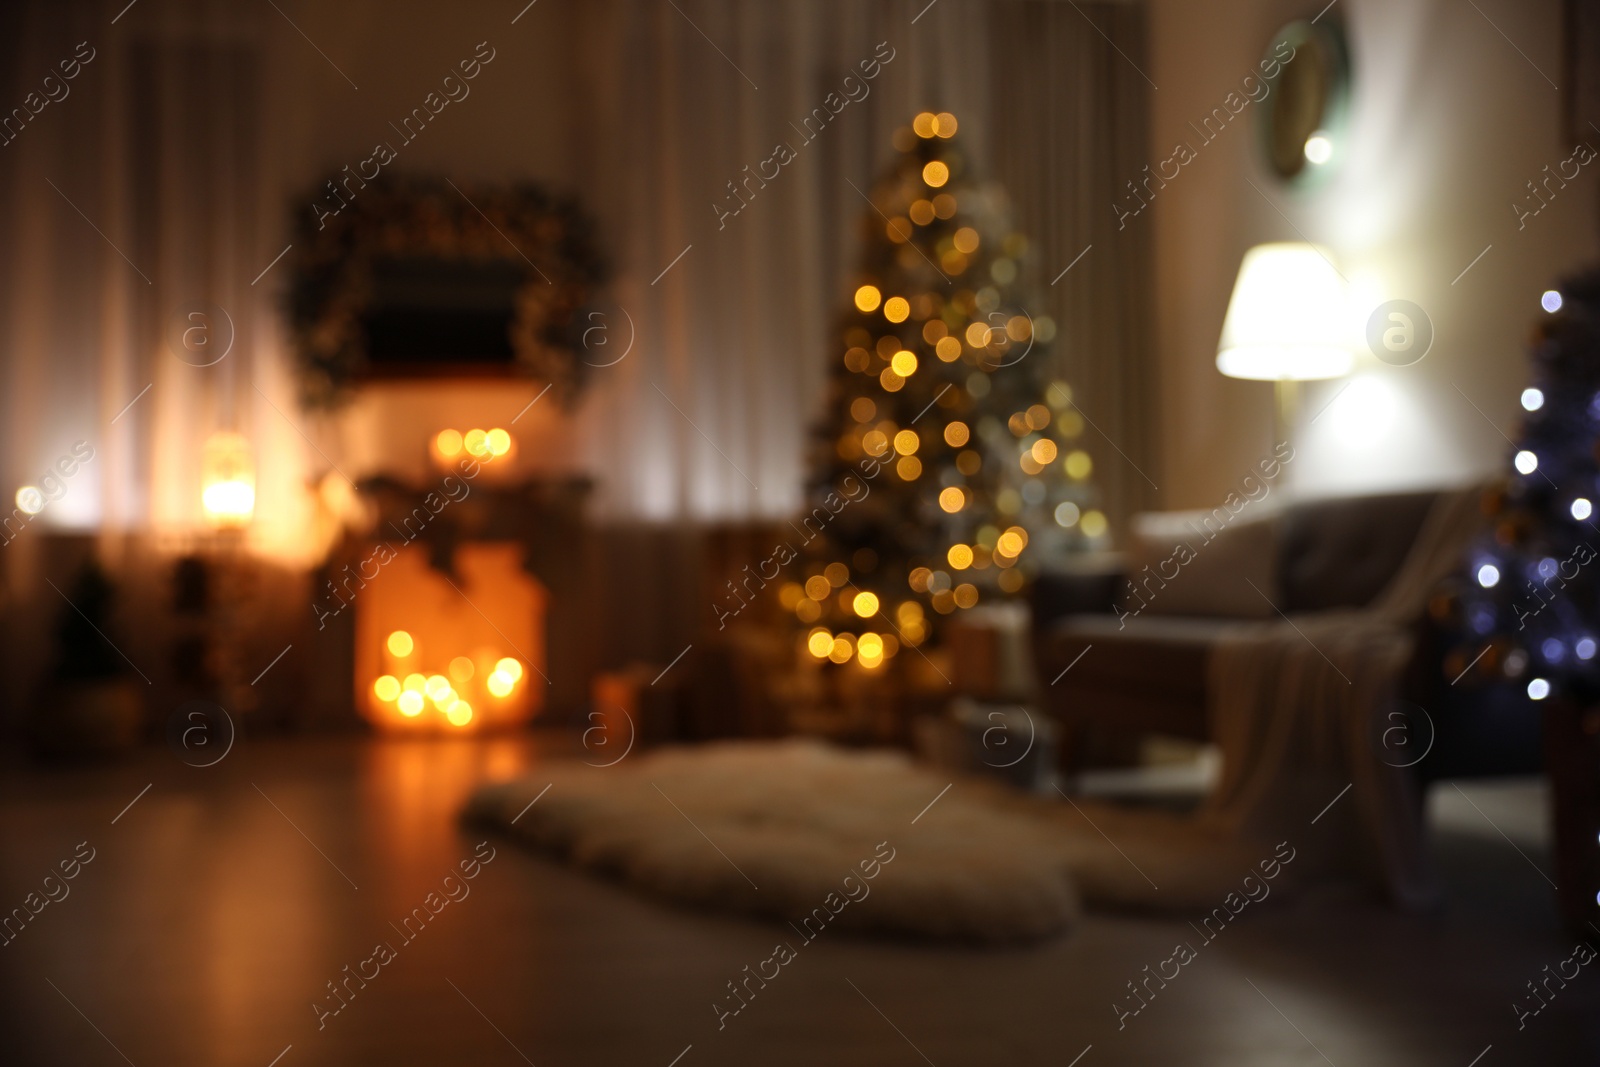 Photo of Blurred view of festive interior with Christmas tree and decorative fireplace